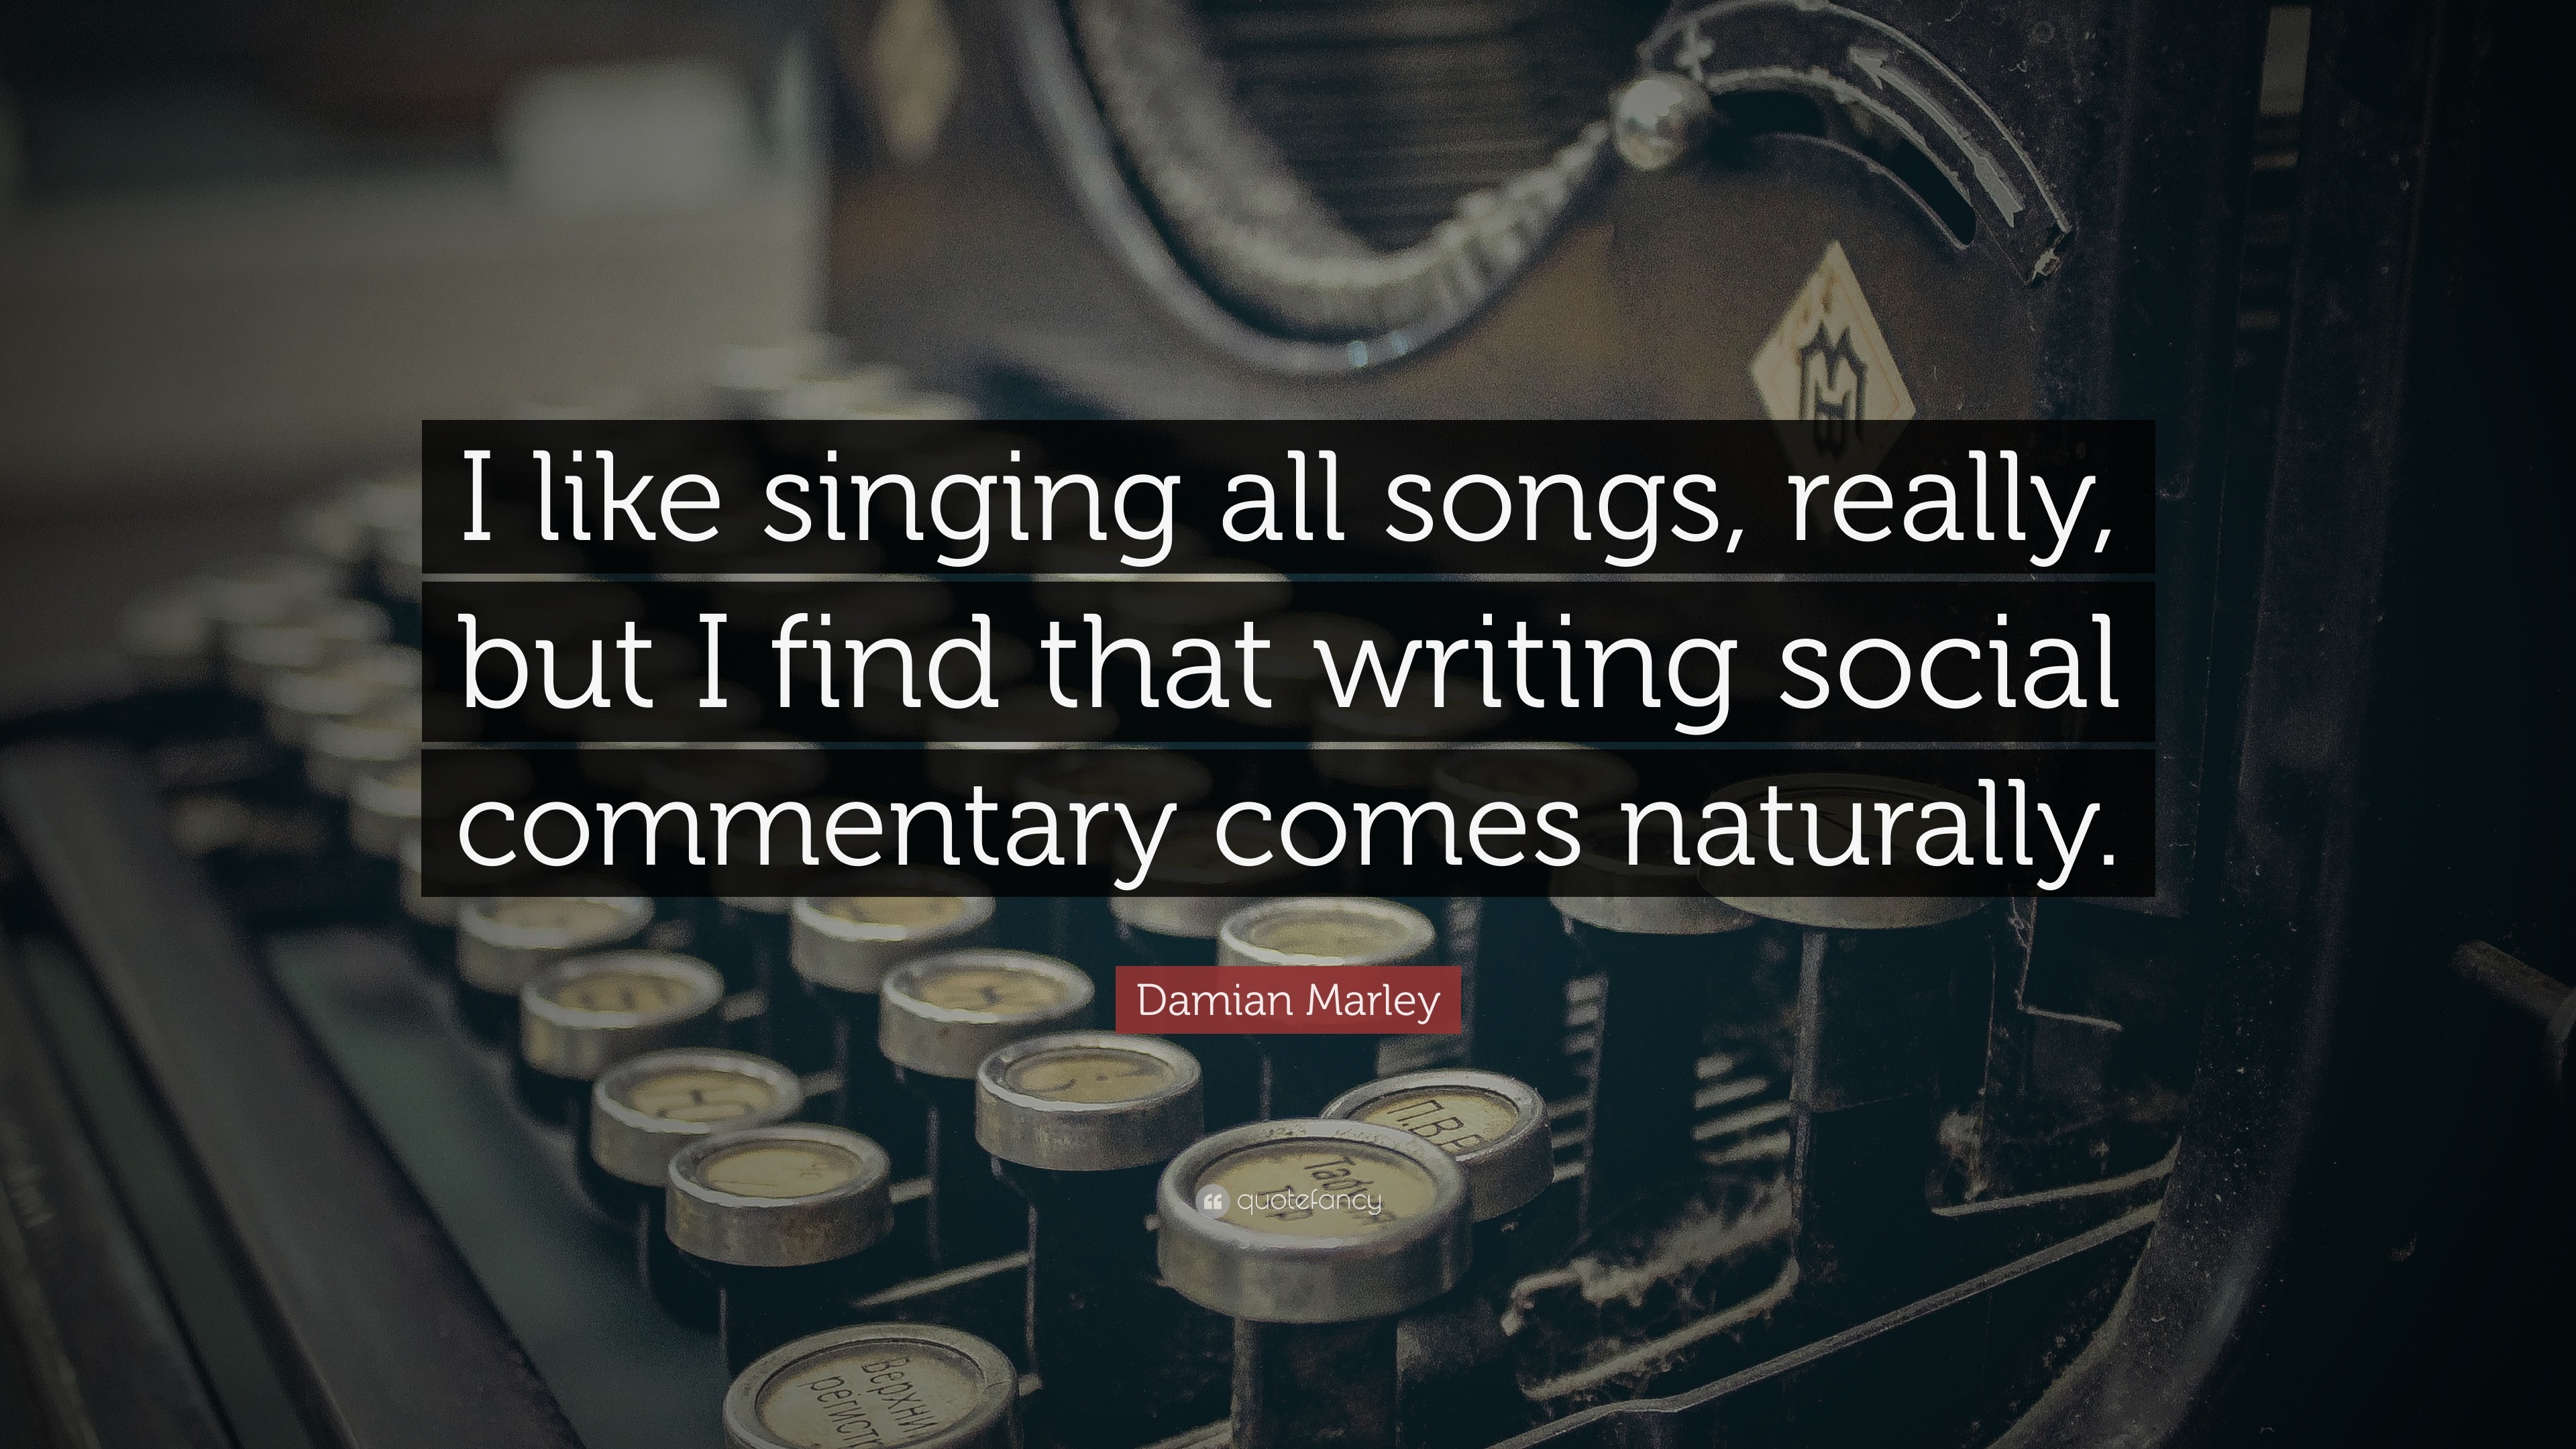 3840x2160 Damian Marley Quote: “I like singing all songs, really, but I find